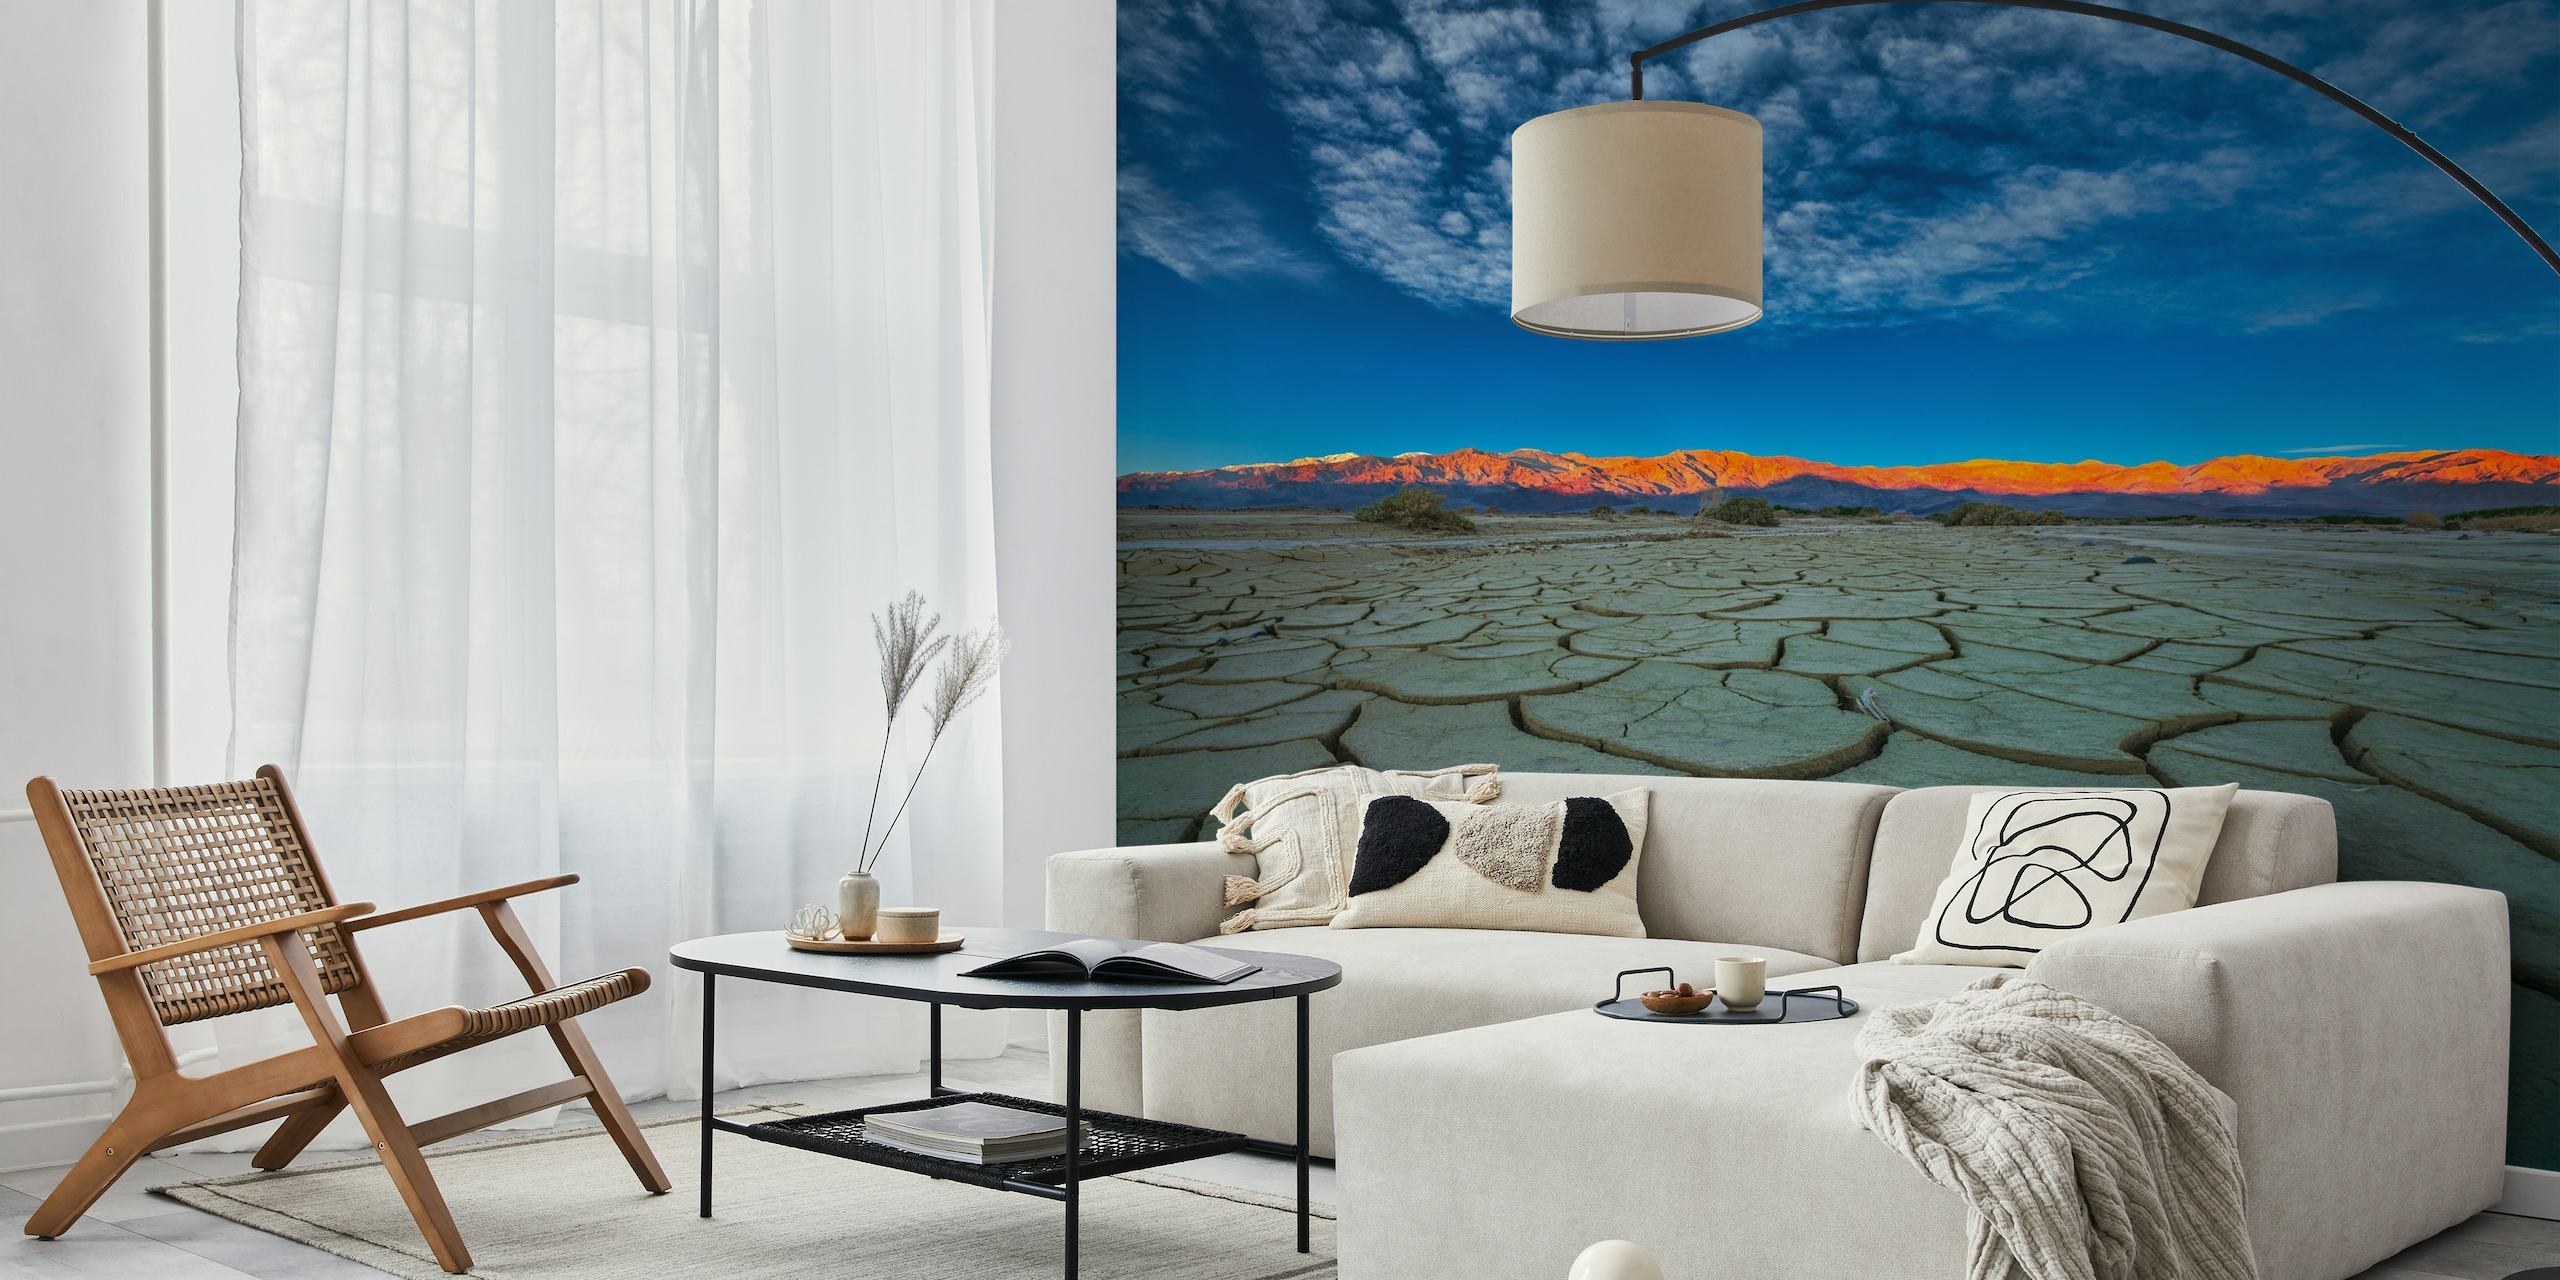 Cracked dry earth with distant sunset-lit mountains wall mural